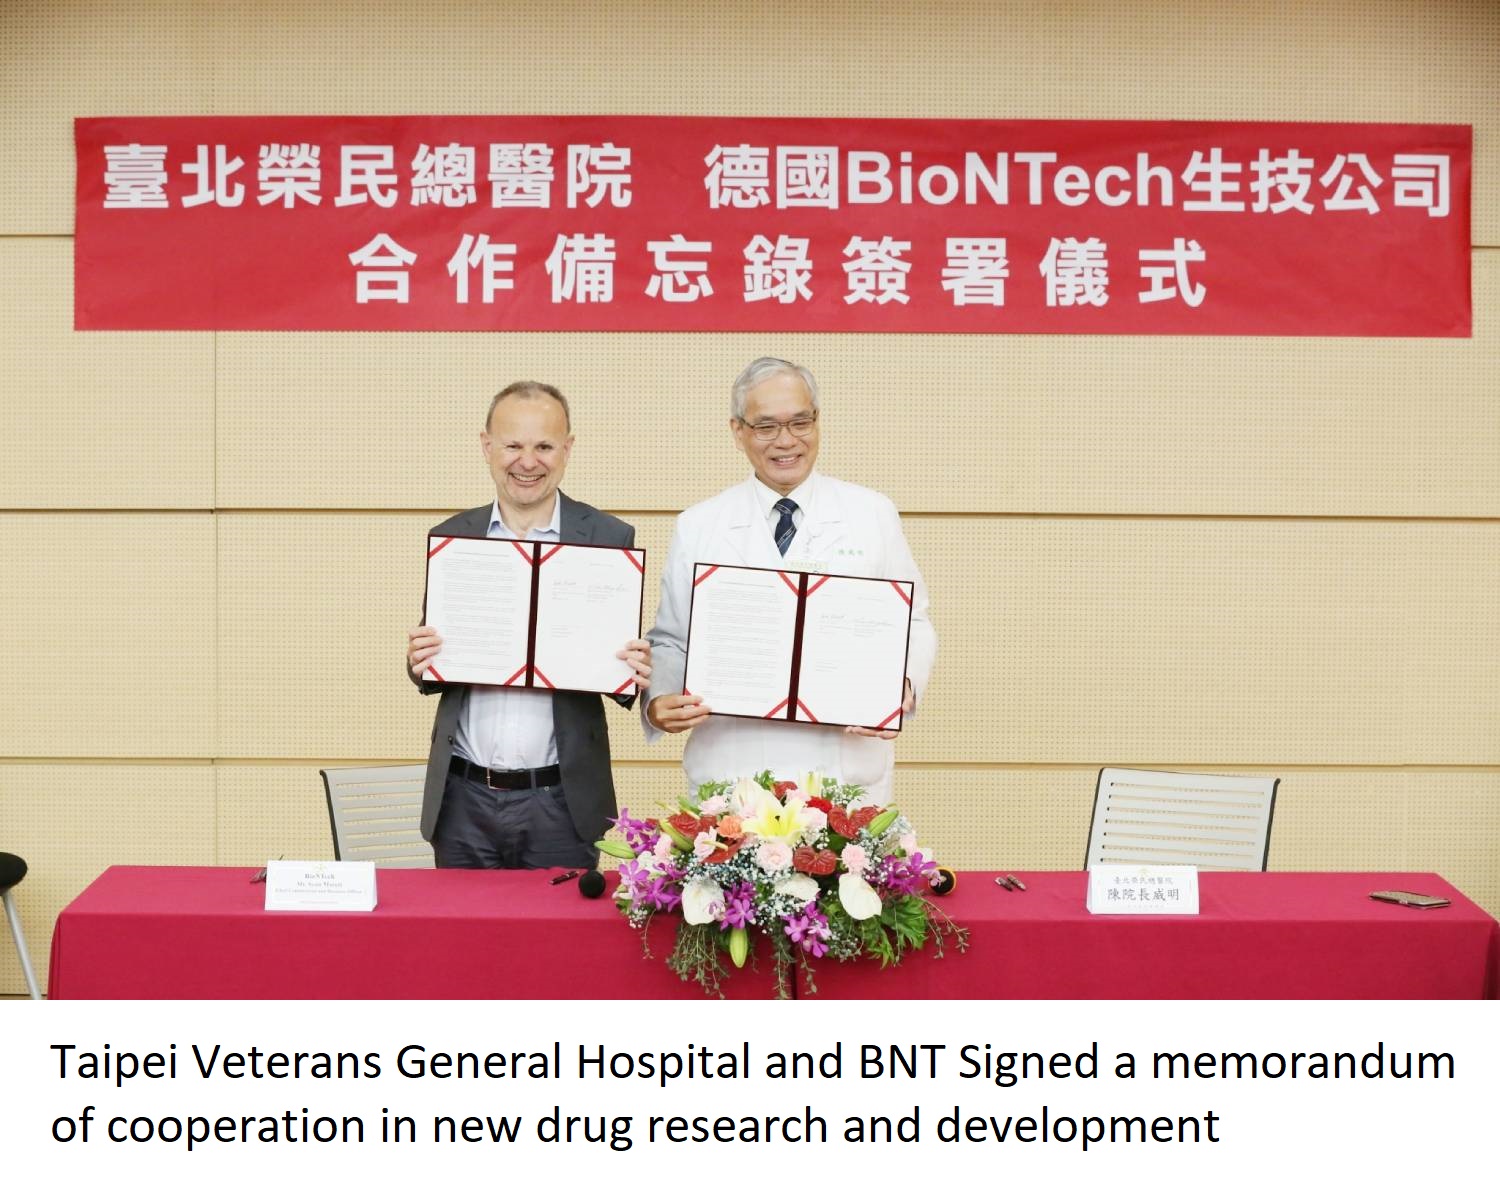 Taipei Veterans General Hospital and BNT Signed a memorandum of cooperation in new drug research and development